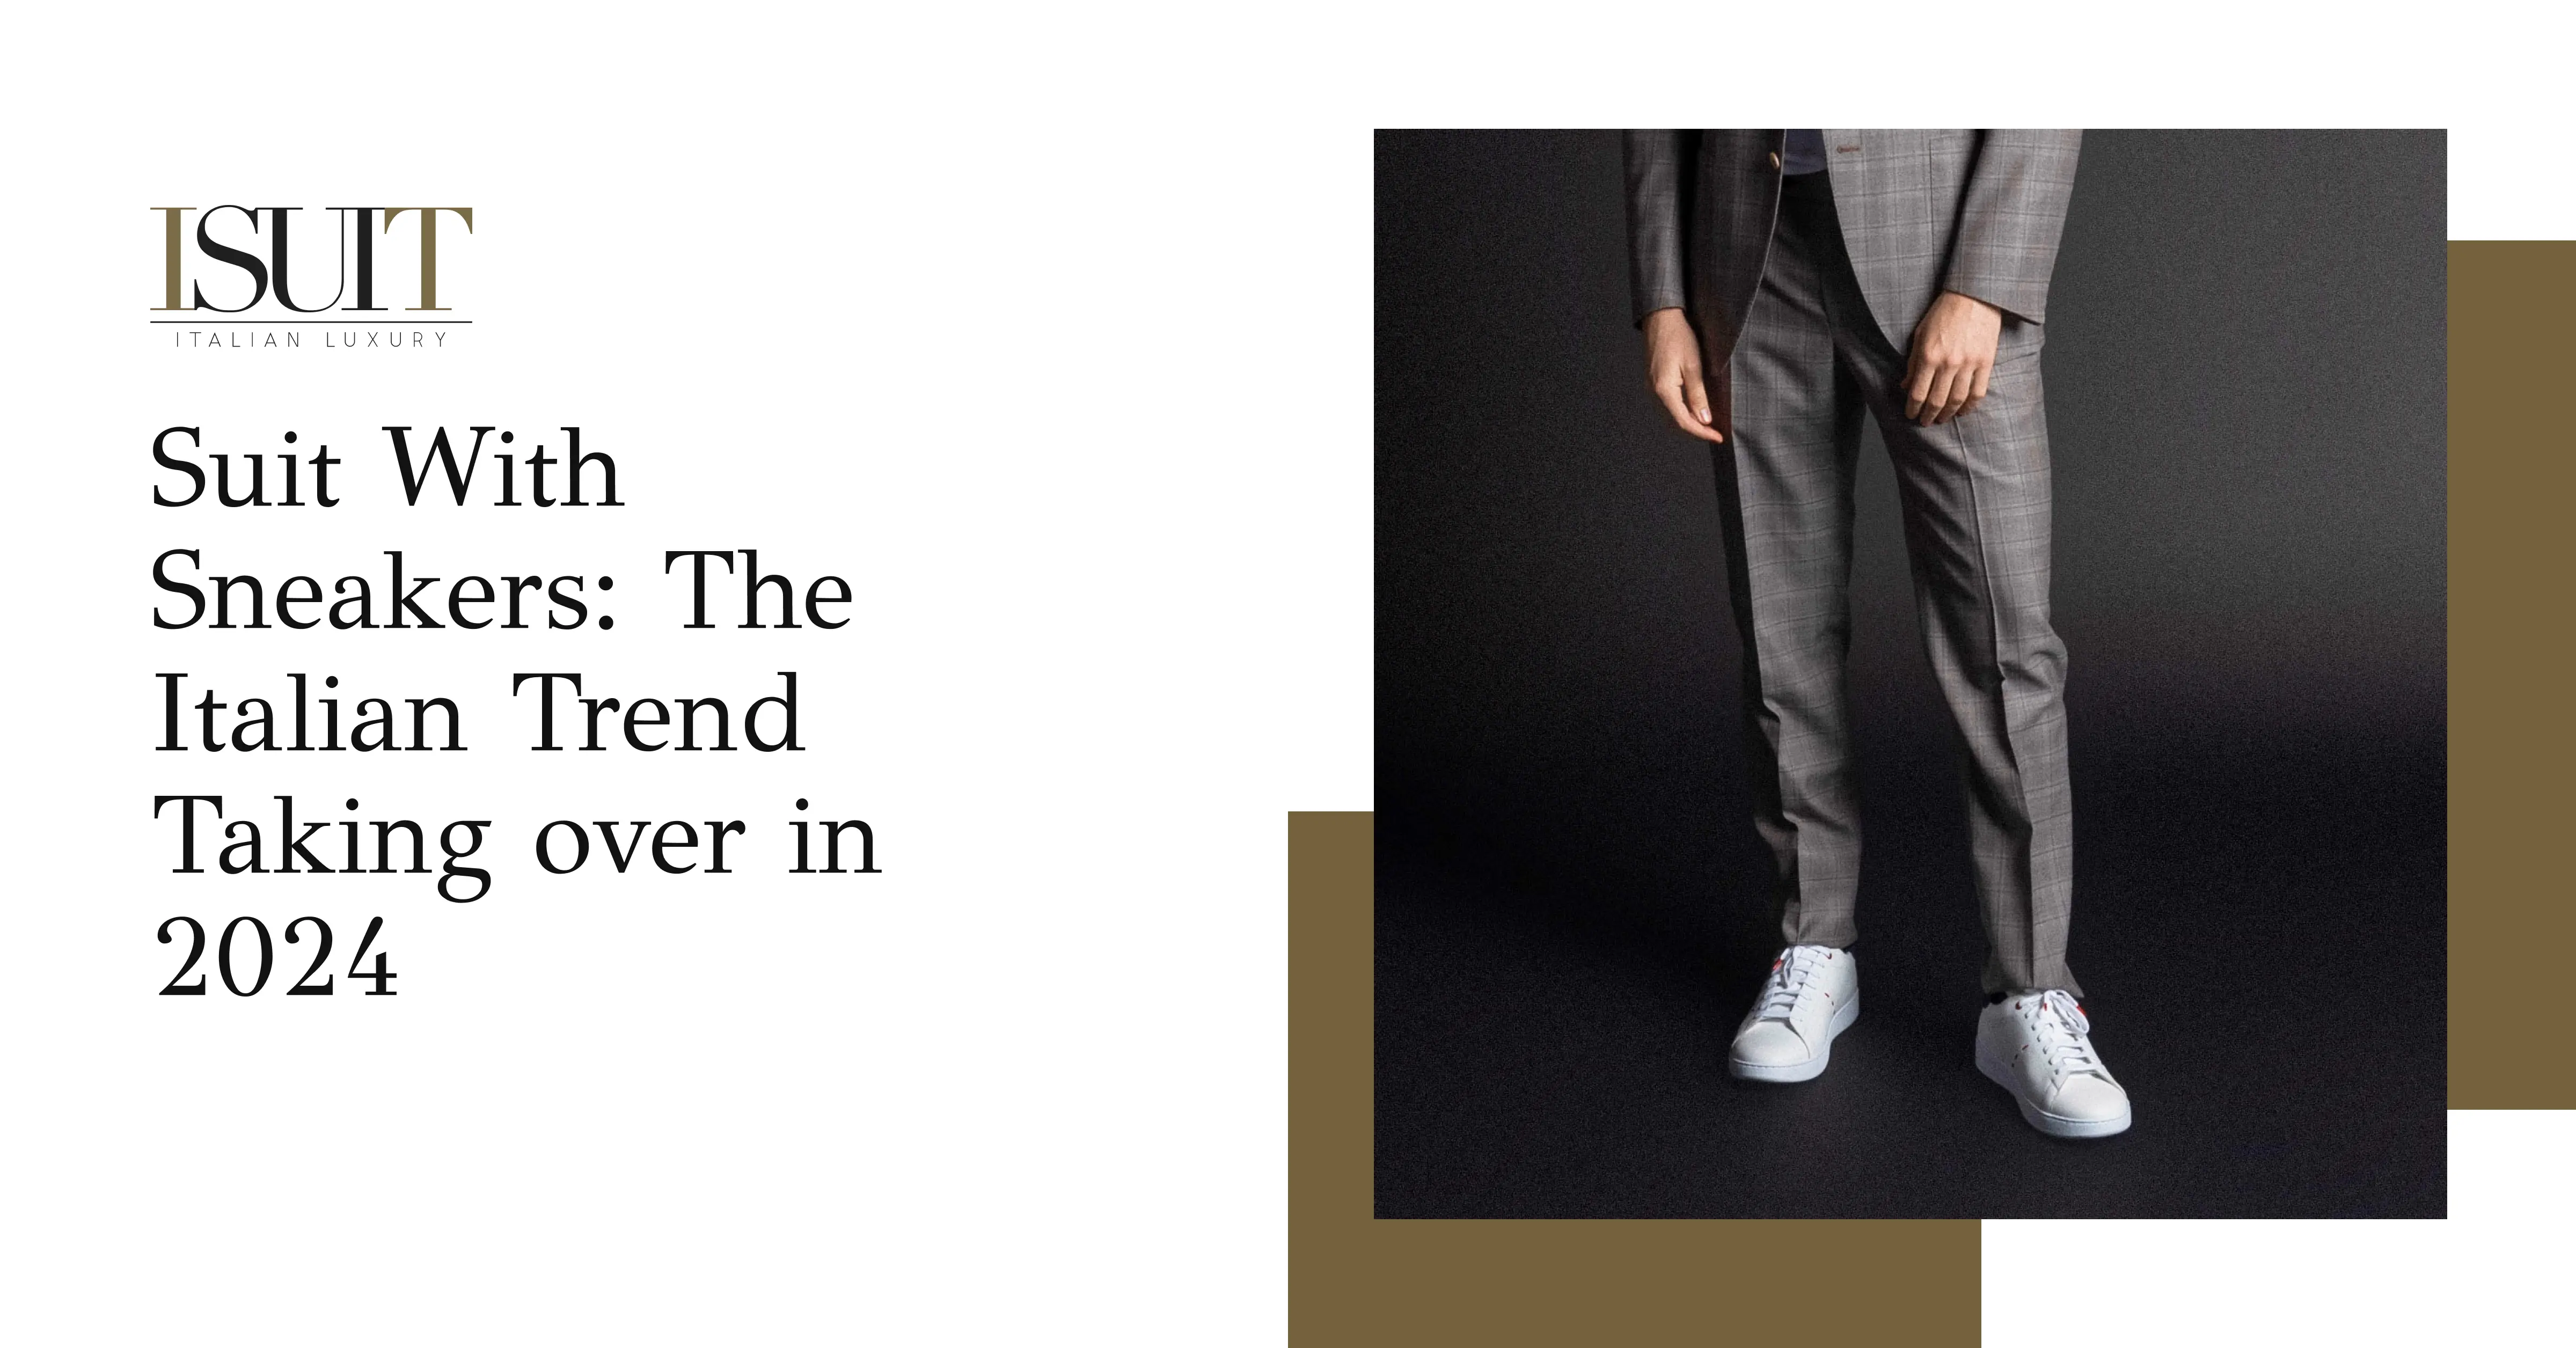 Suit With Sneakers: The Italian Trend Taking over in 2024